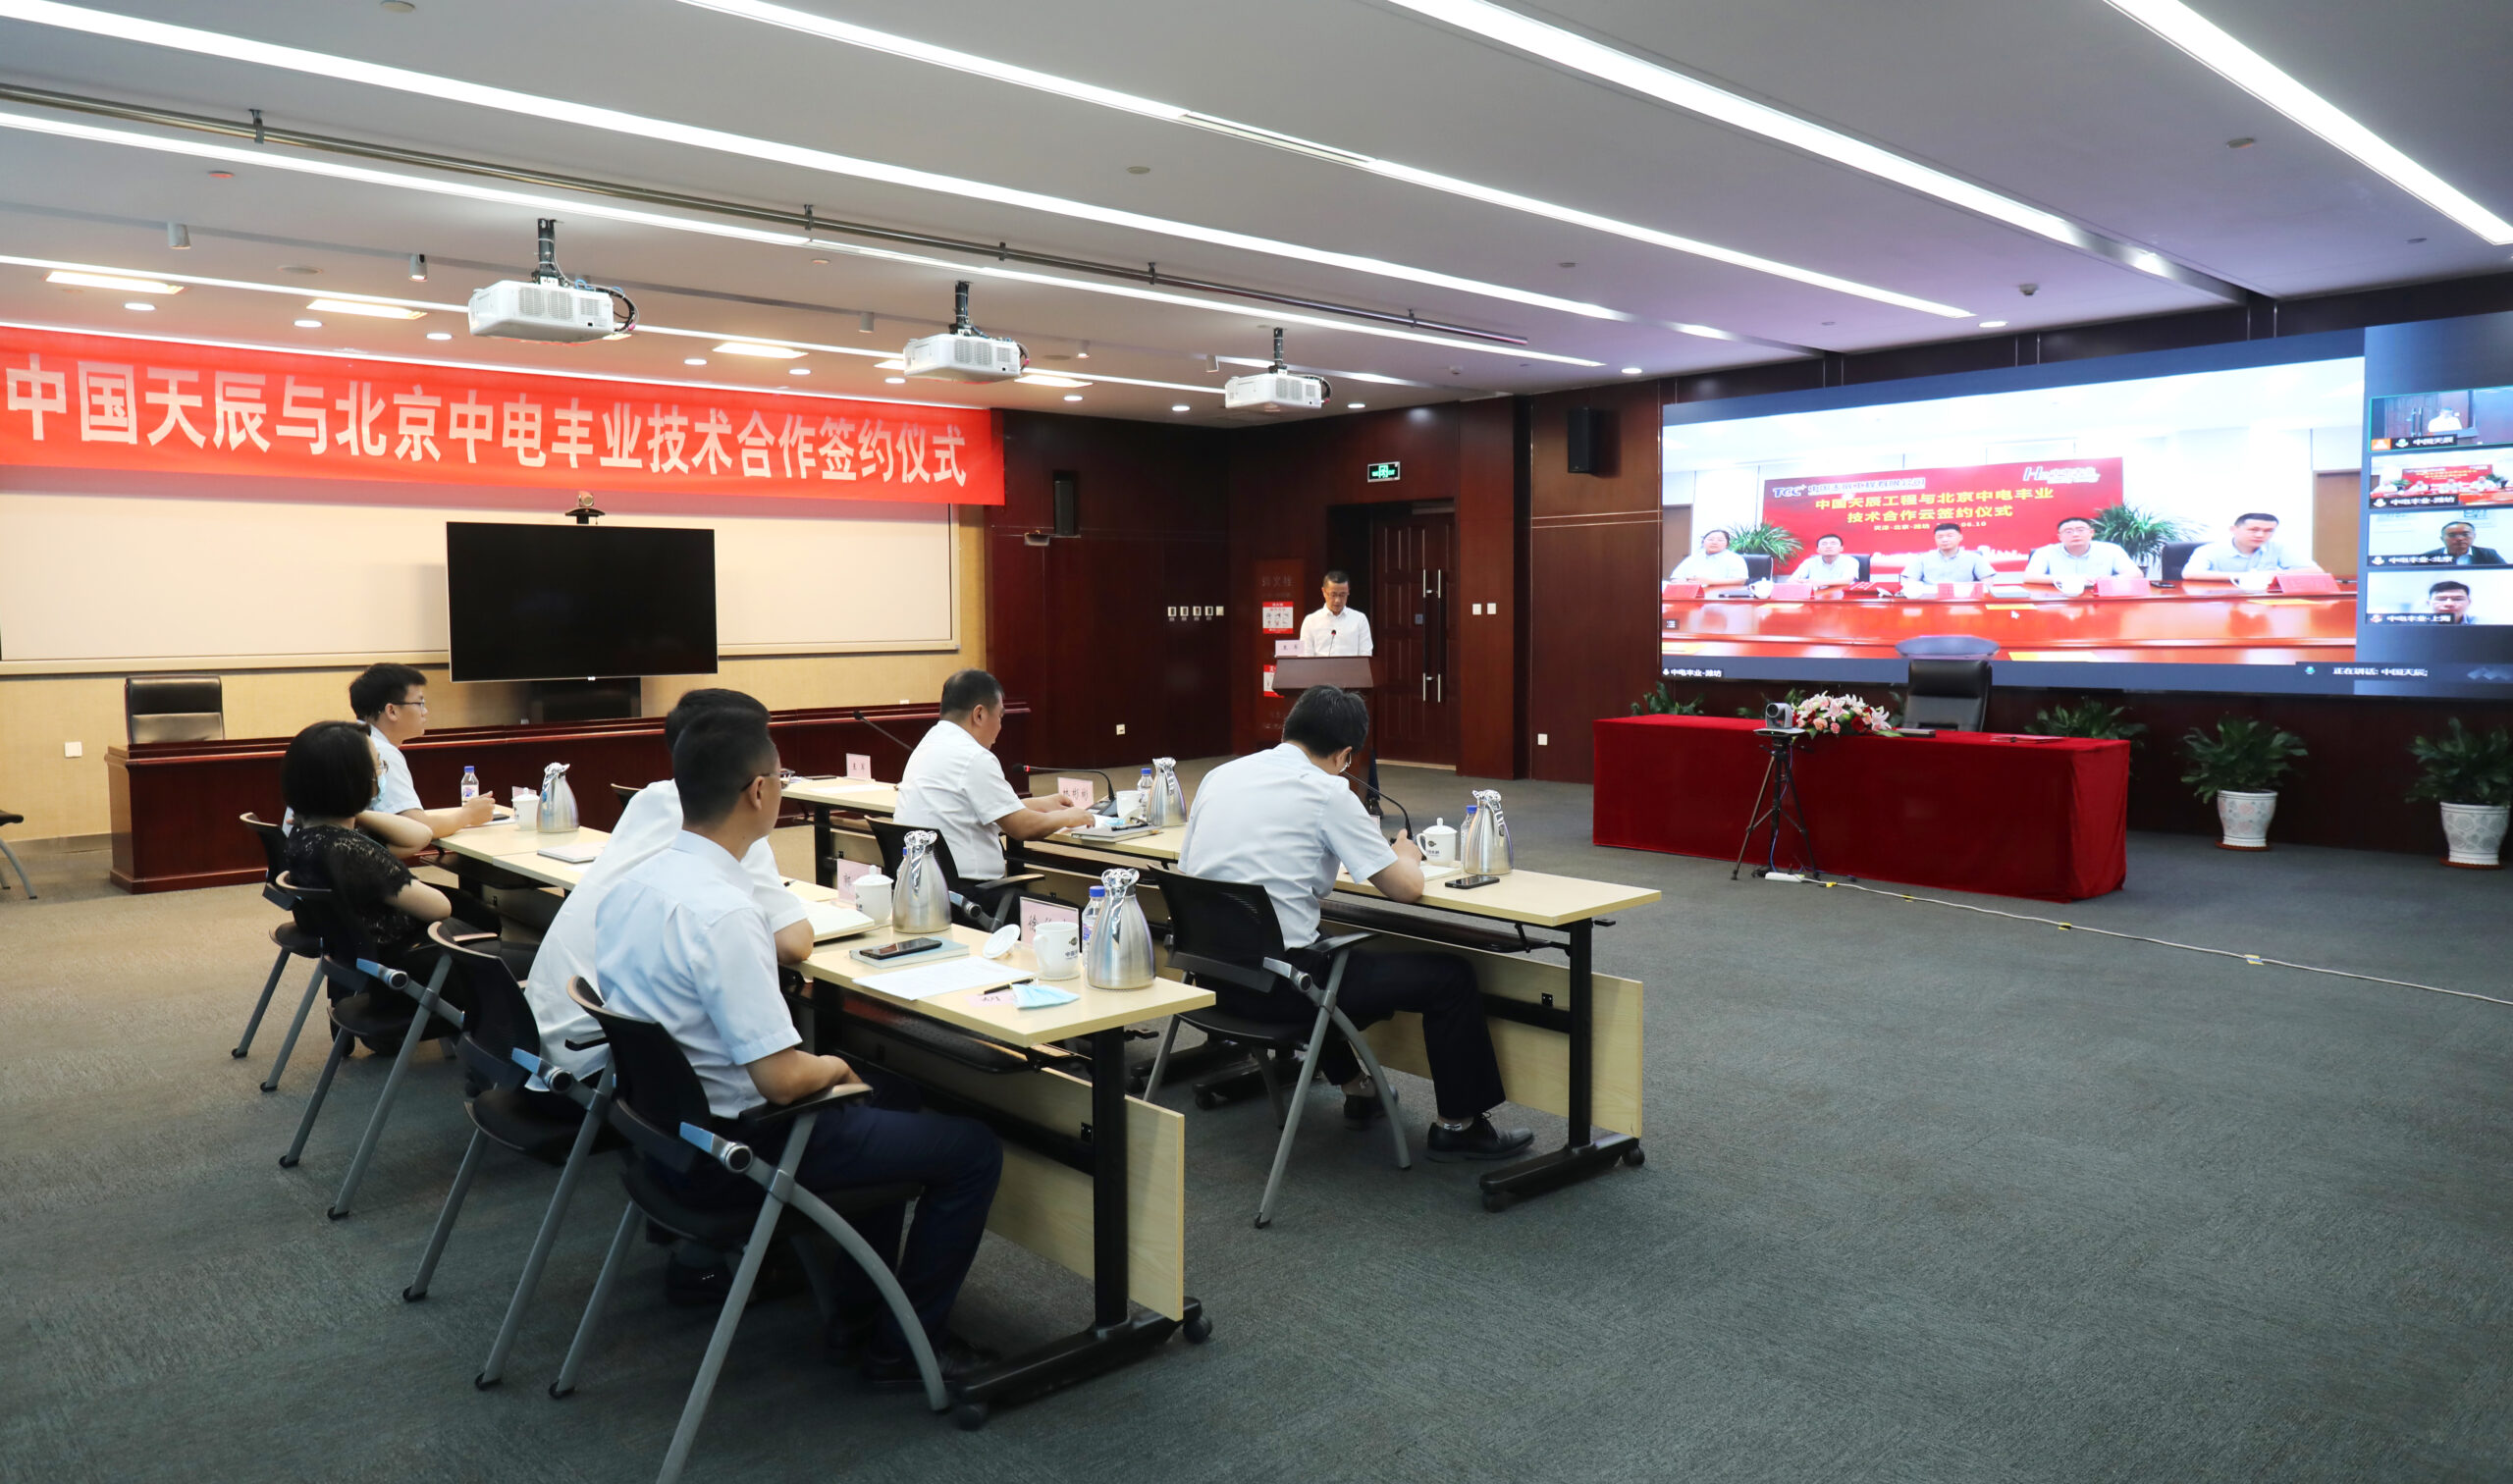 Beijing SinoHy Energy Co., Ltd. and China Tianchen Engineering Co., Ltd. formally signed a strategic cooperation agreement